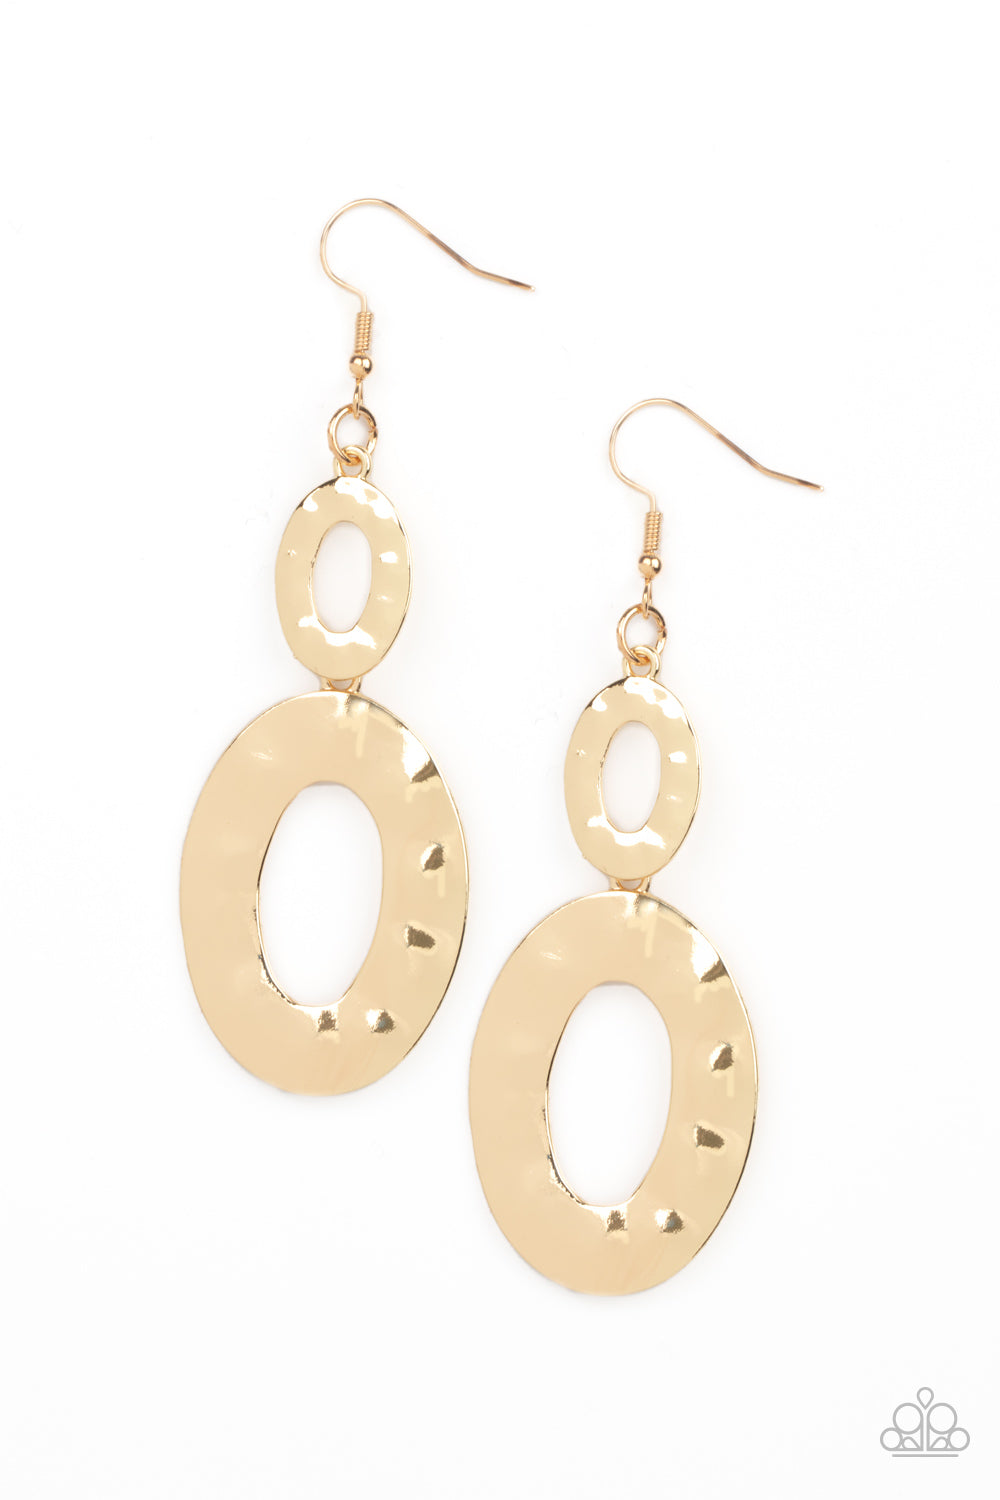 Bring On The Basics Gold Earring - Paparazzi Accessories